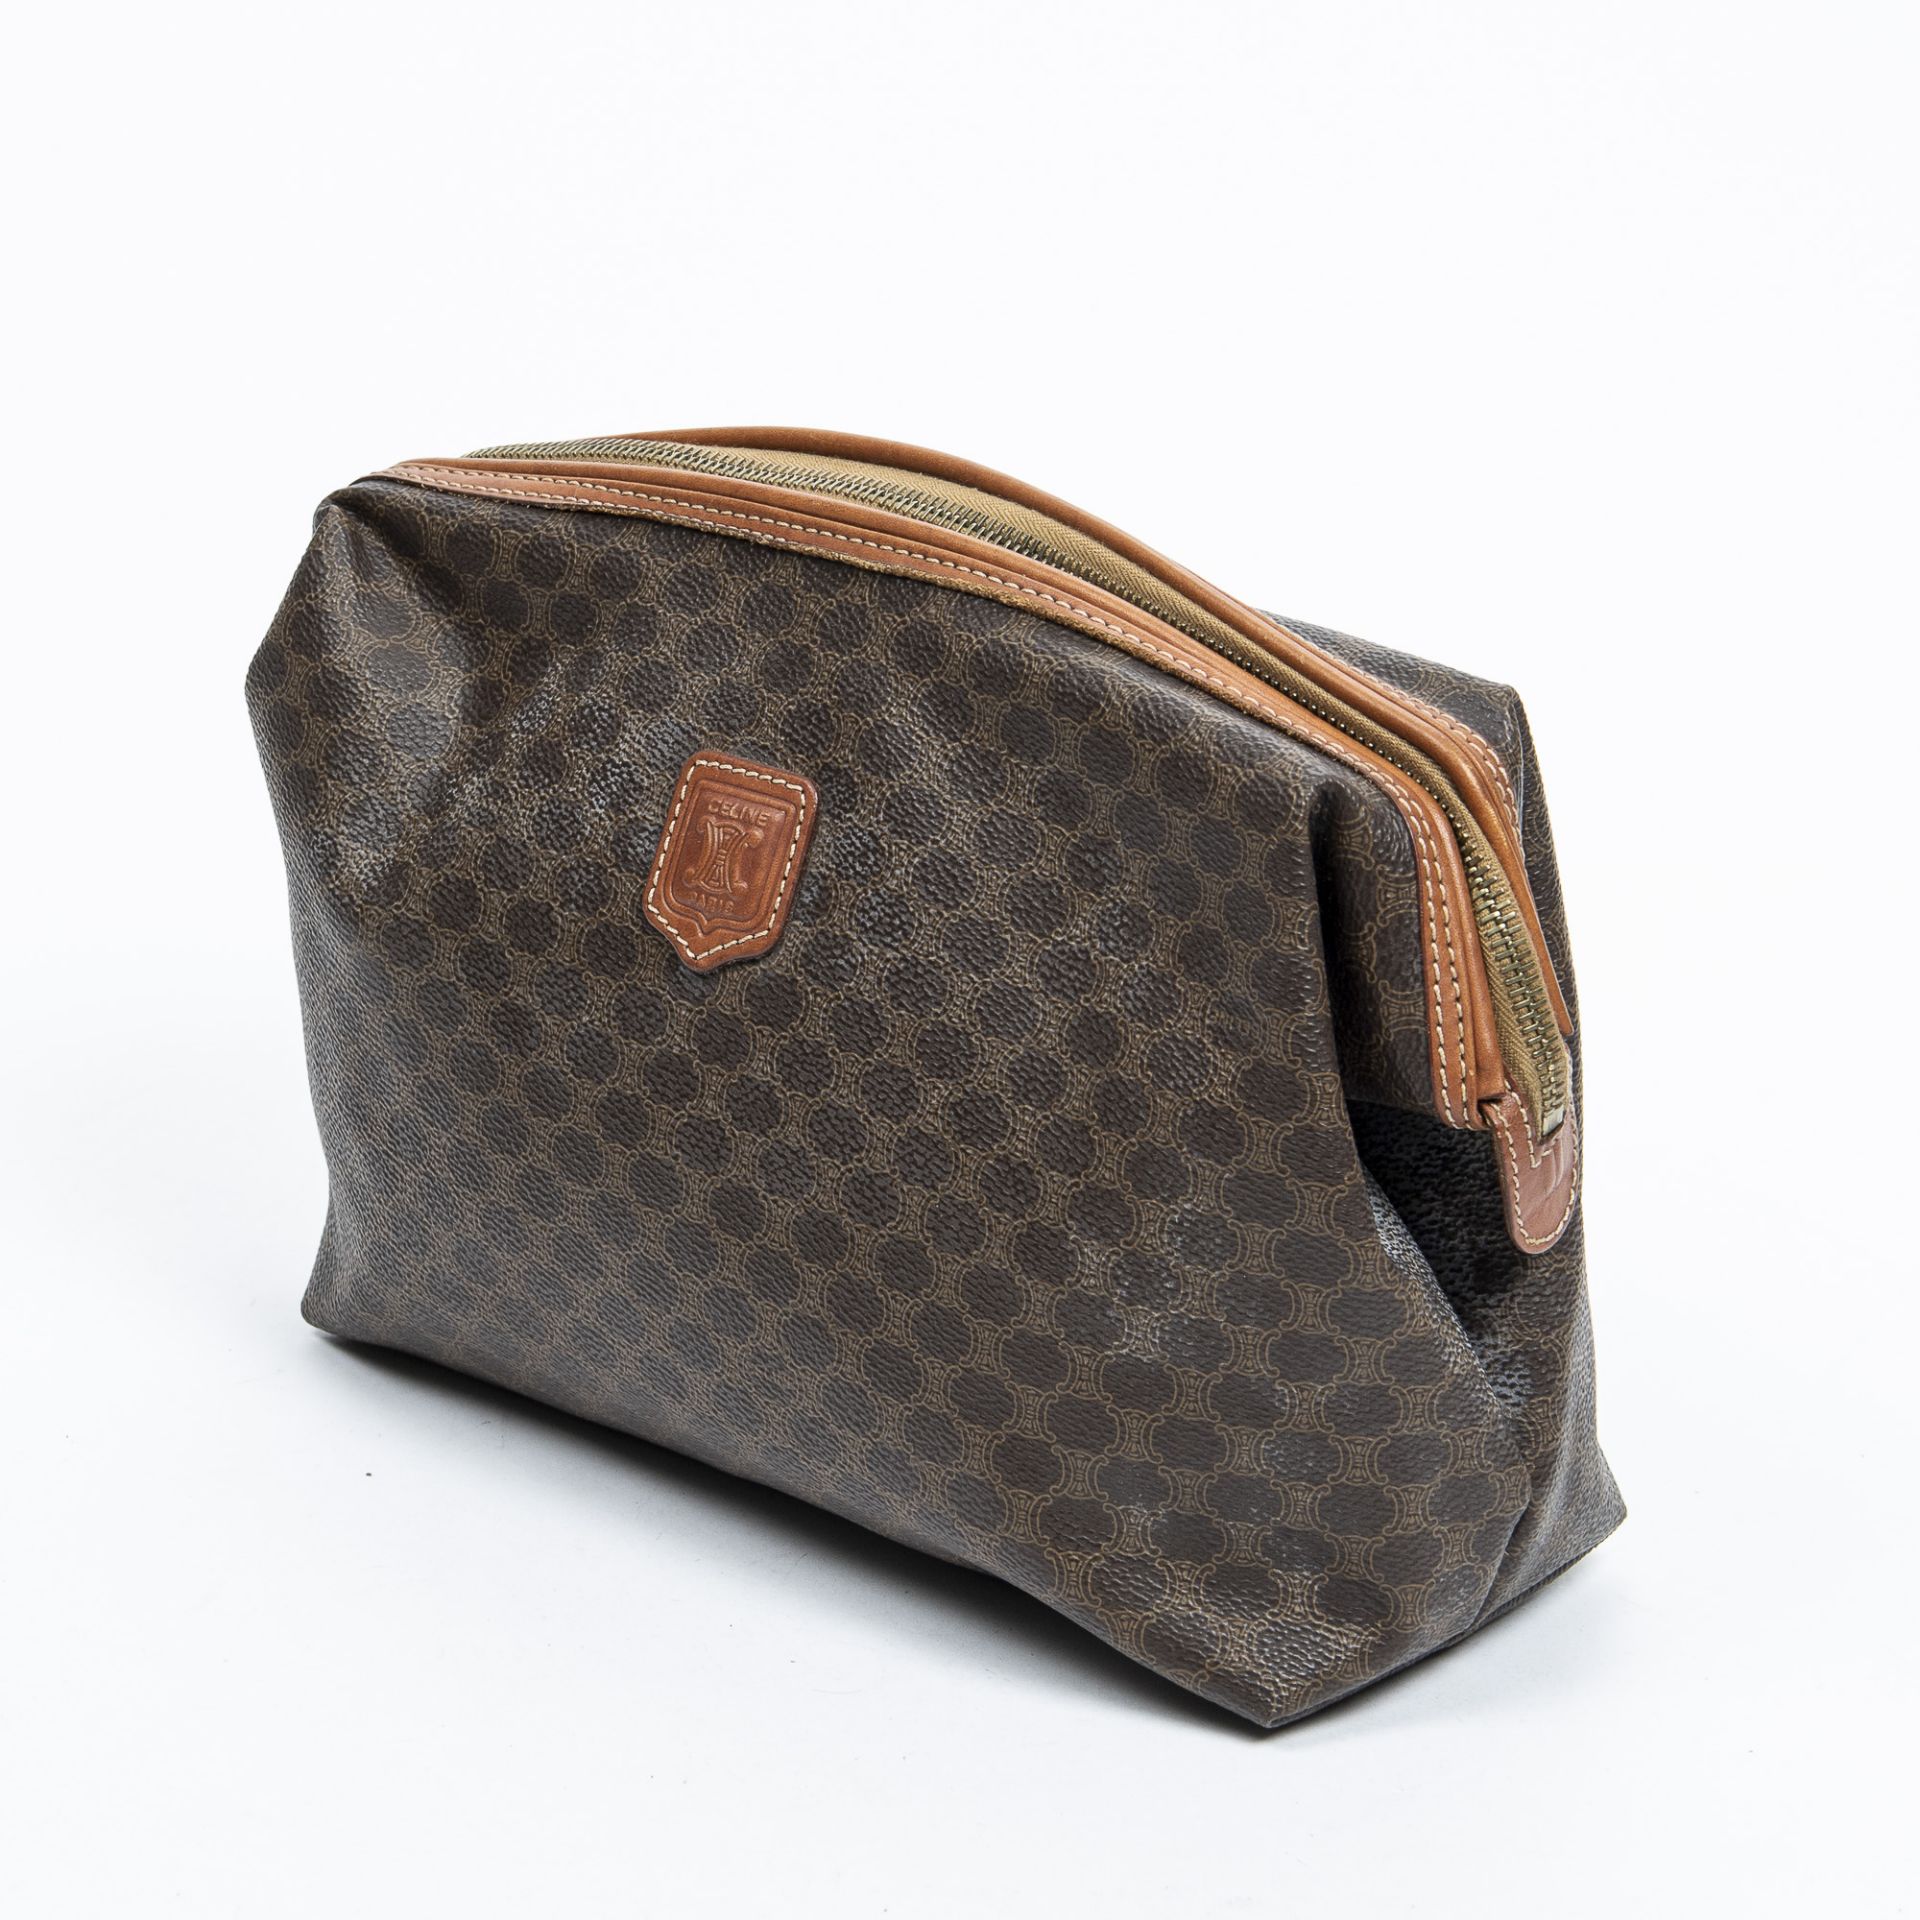 RRP £760.00 Lot To Contain 1 Celine Coated Canvas Vintage Pouch In Brown - 25*20*10cm - AB - AAR1169 - Image 2 of 4